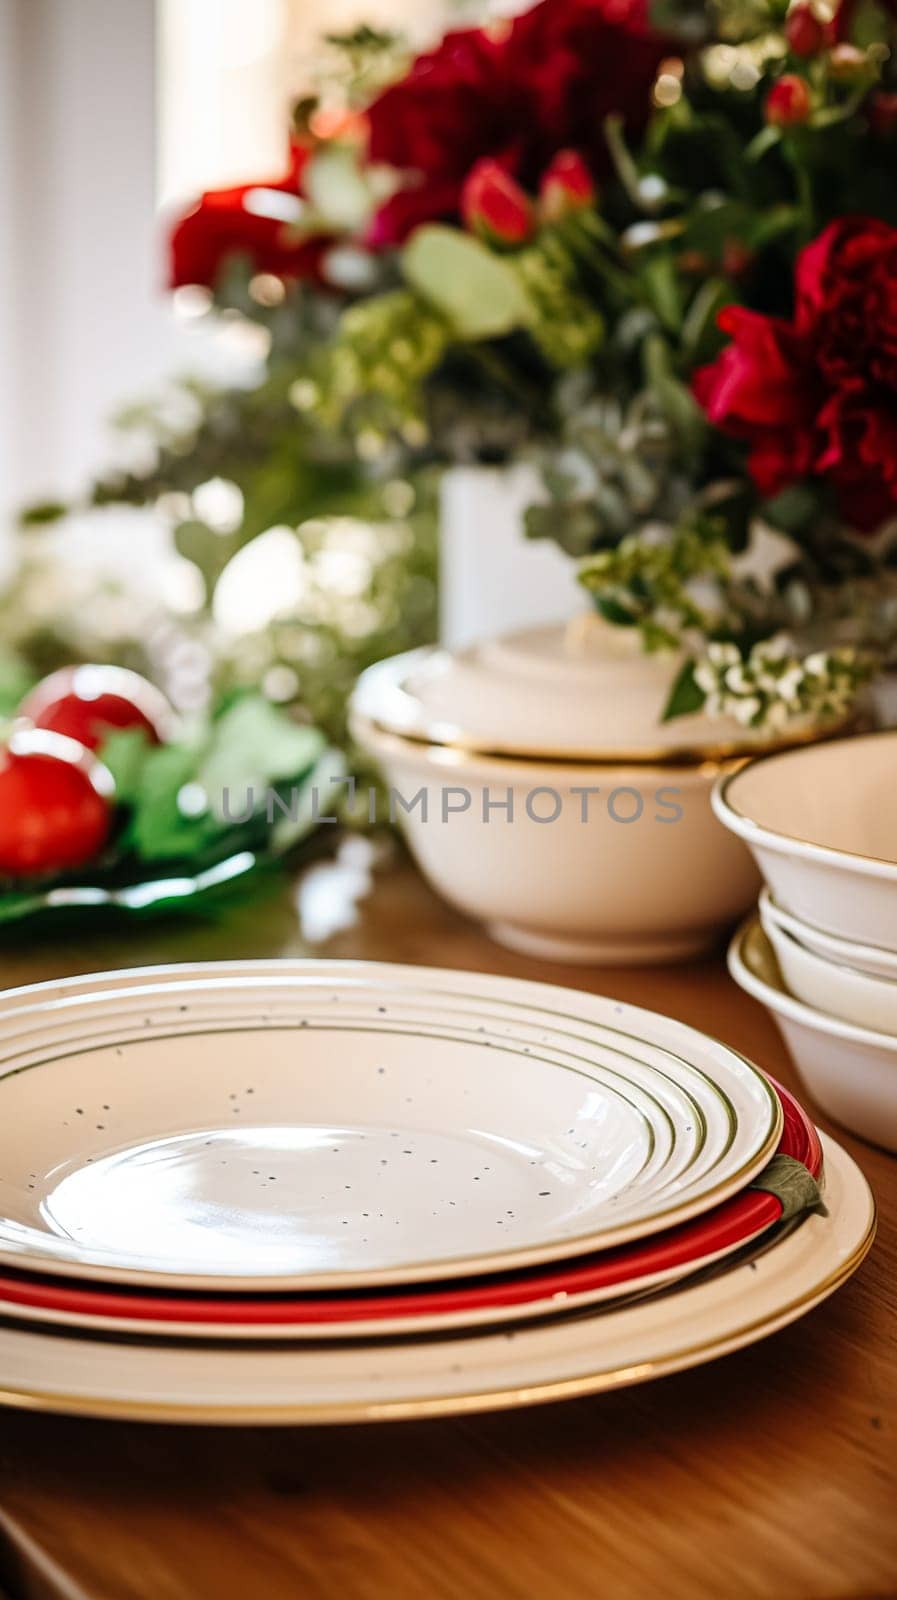 Dishware and crockery set for winter holiday family dinner, Christmas homeware decor for holidays in the English country house, gift set and home styling by Anneleven